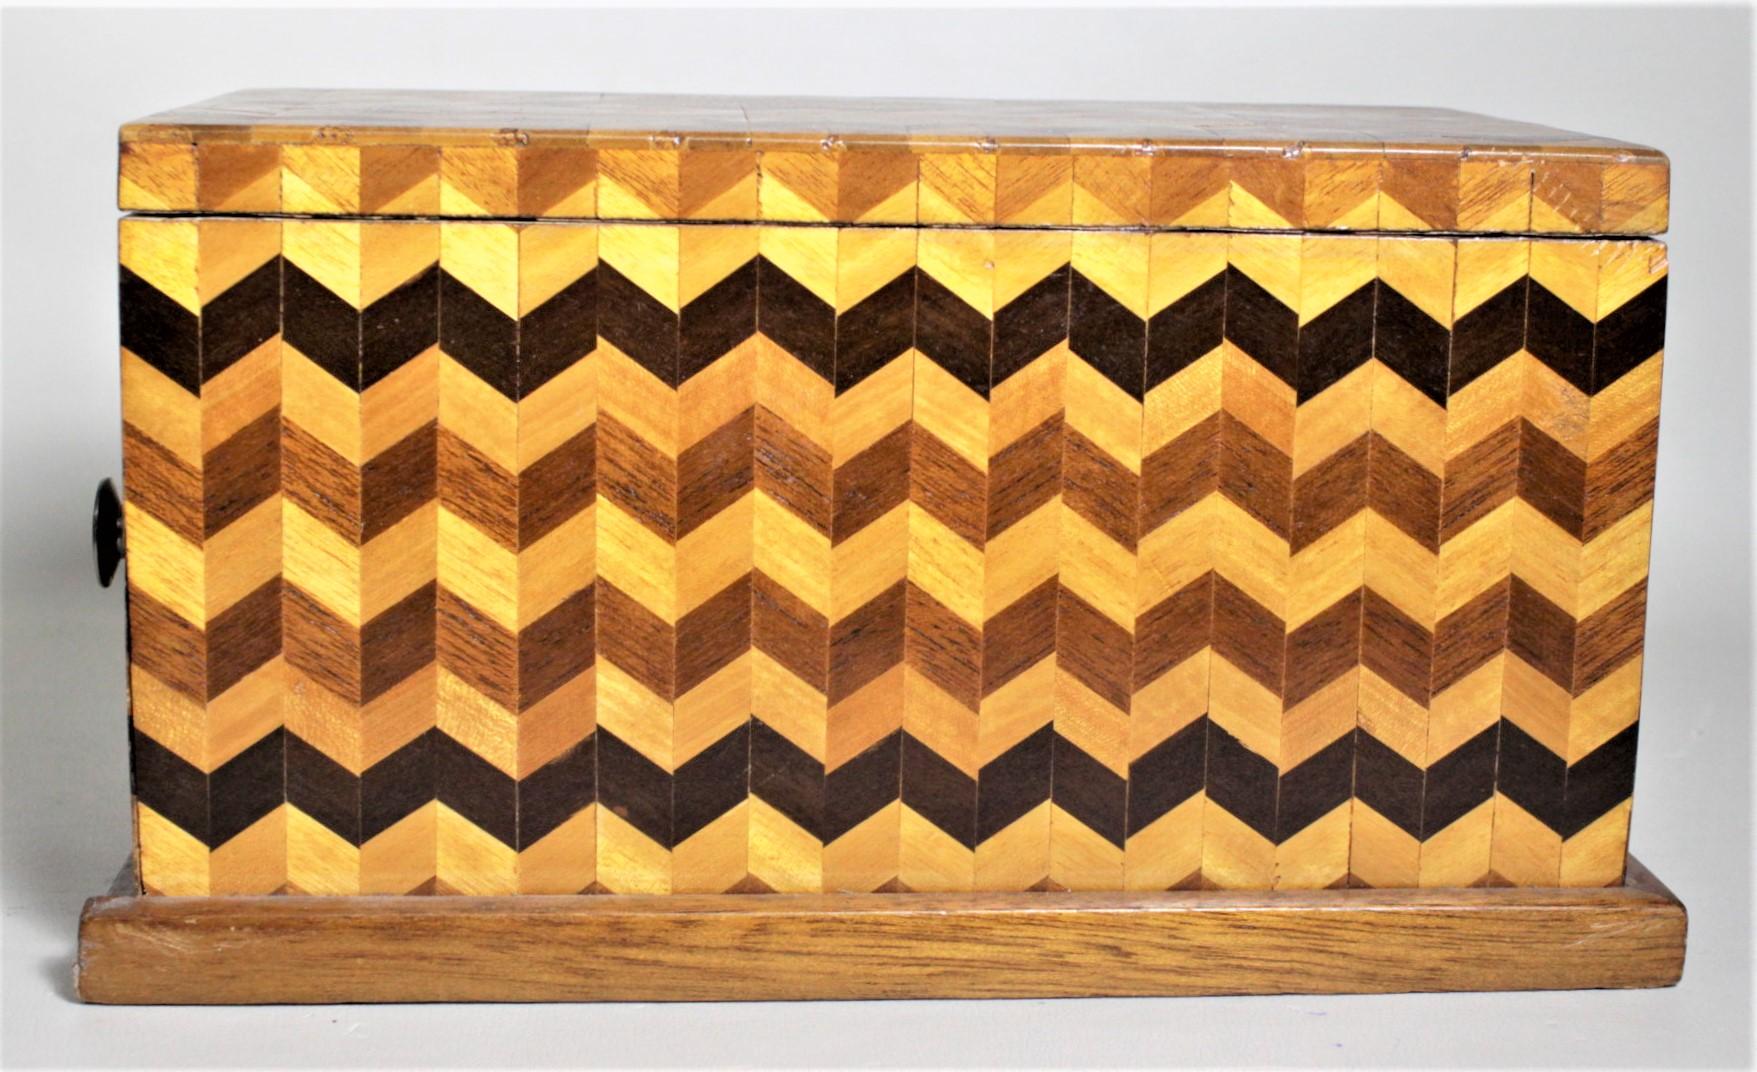 This Mid-Century Modern era parquetry wooden jewelry box was made in the United States in approximately 1955 in a cubist style. The box is done in a series of woods with various stains geometrically cut and applied to the outside of the box in a